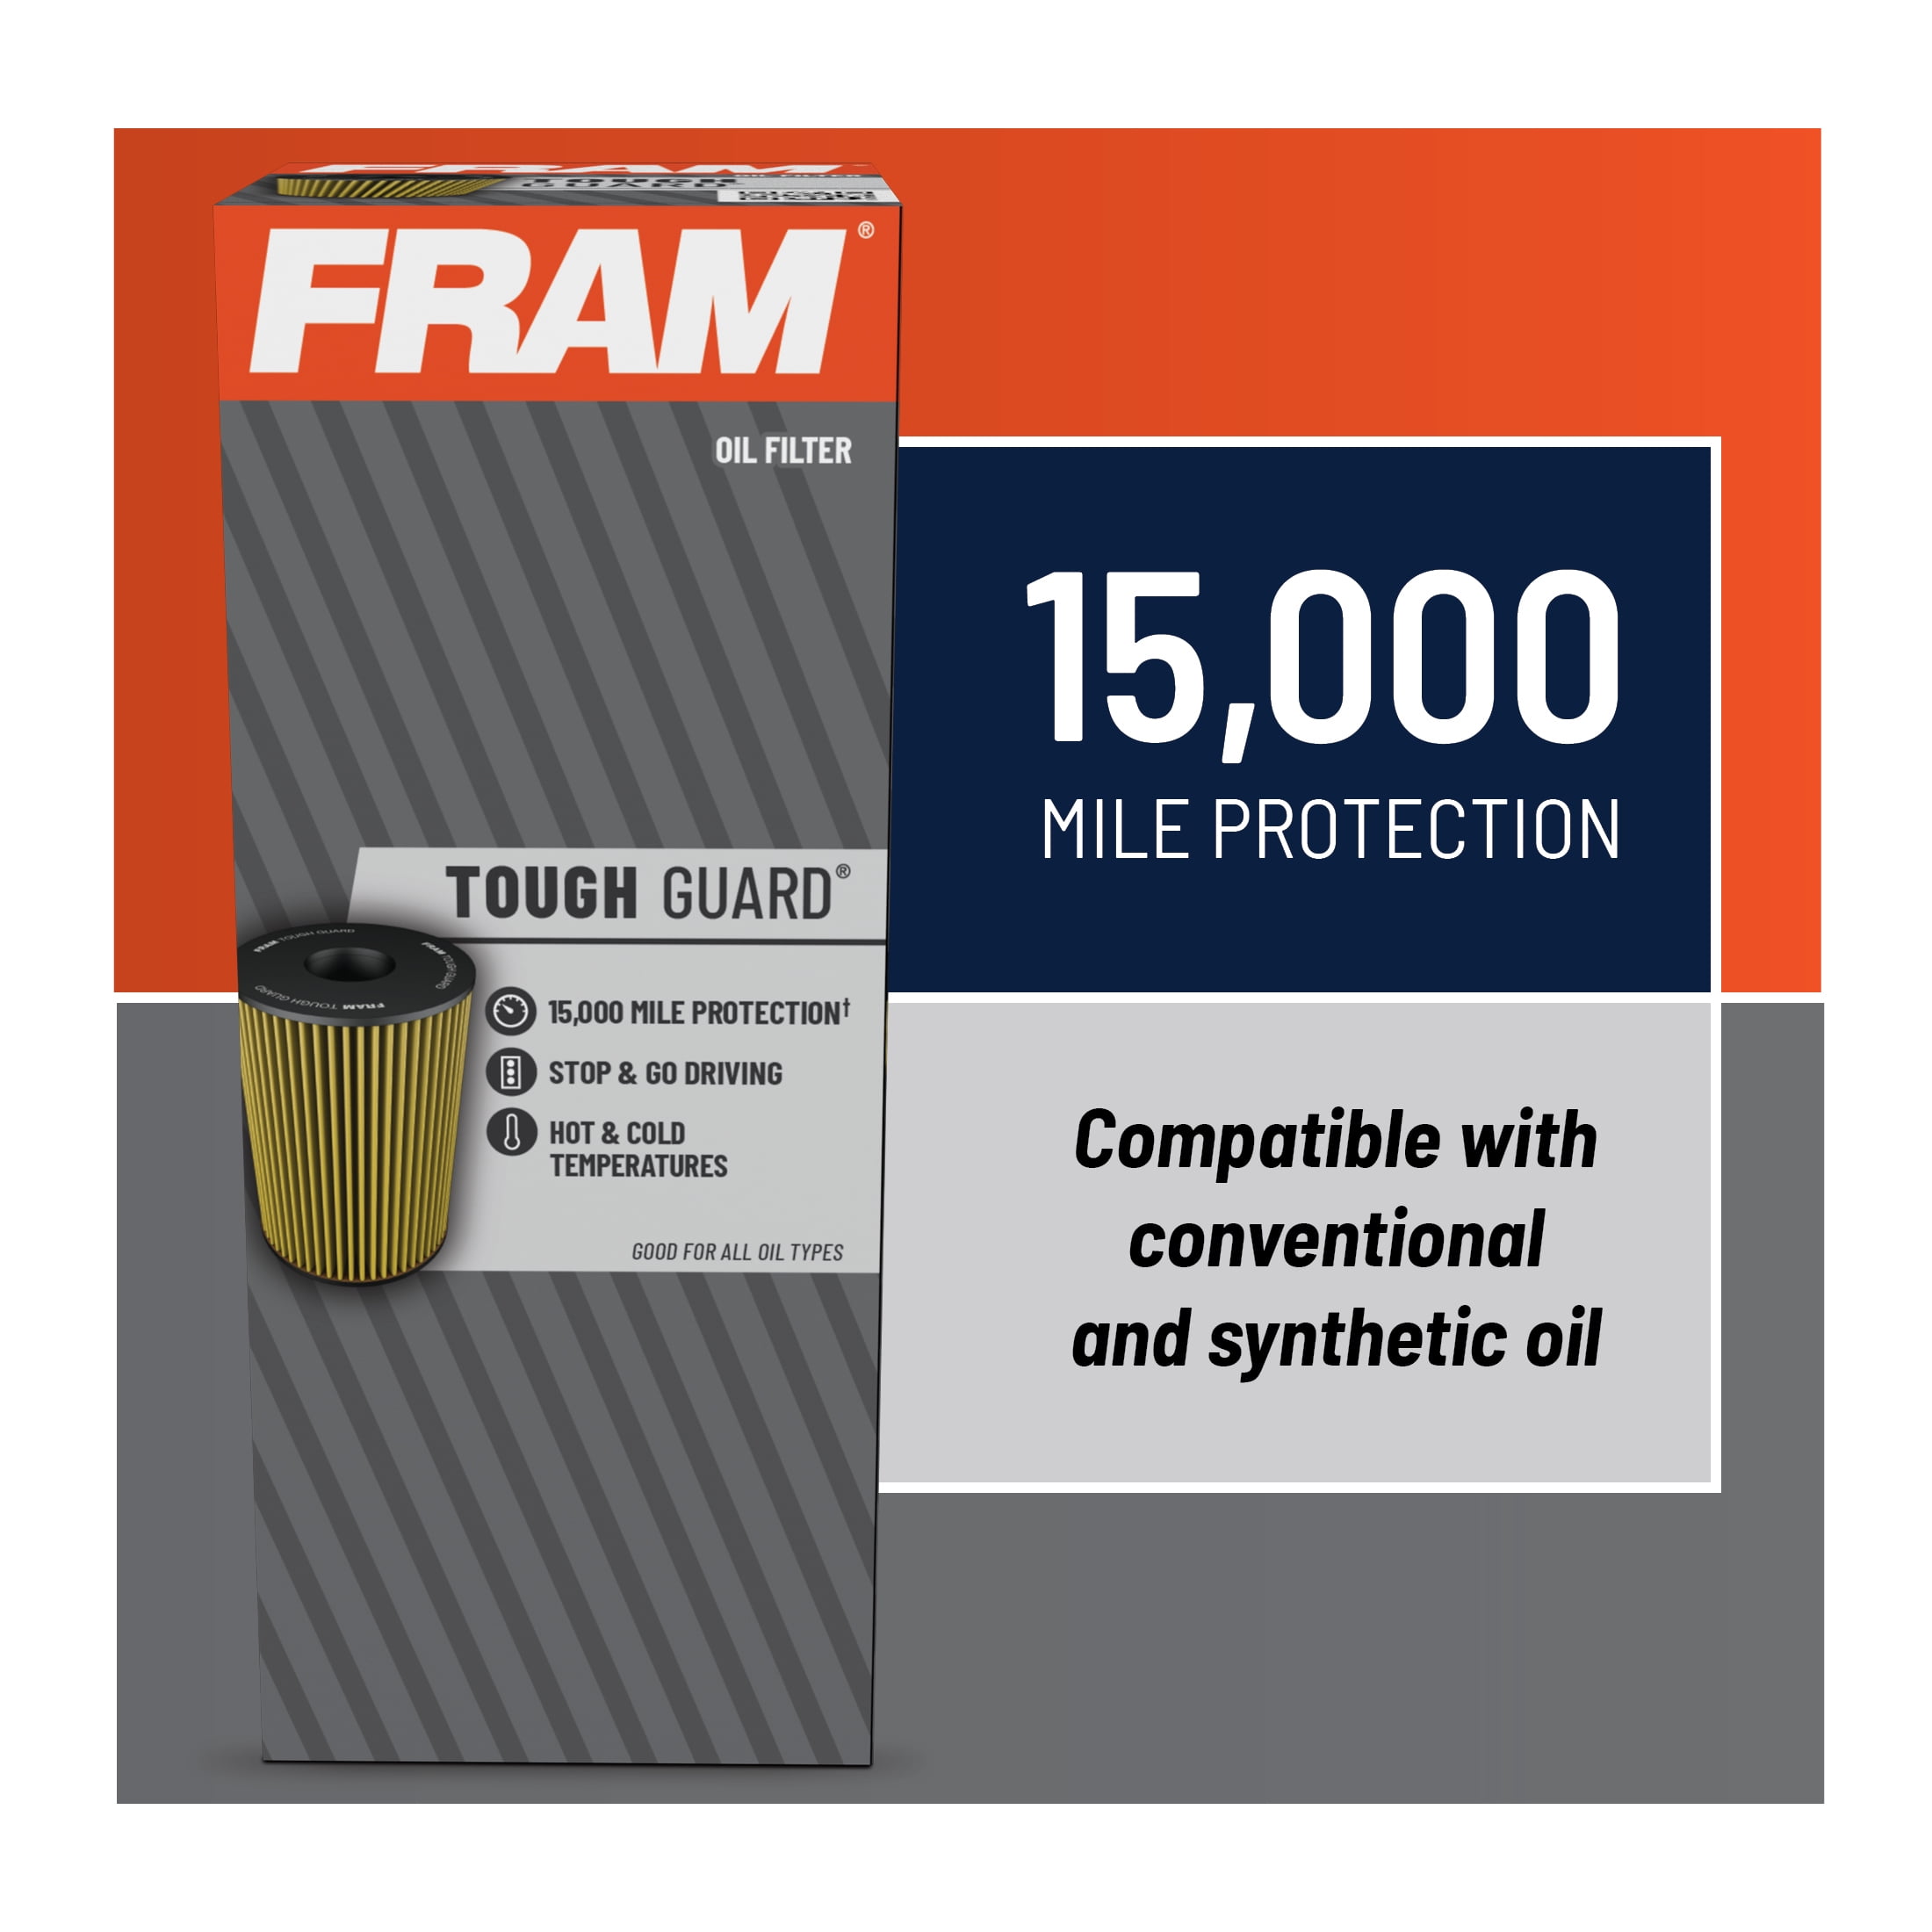 FRAM Tough Guard 15,000 Mile Replacement Oil Filter, TG10066, for Mini Cooper